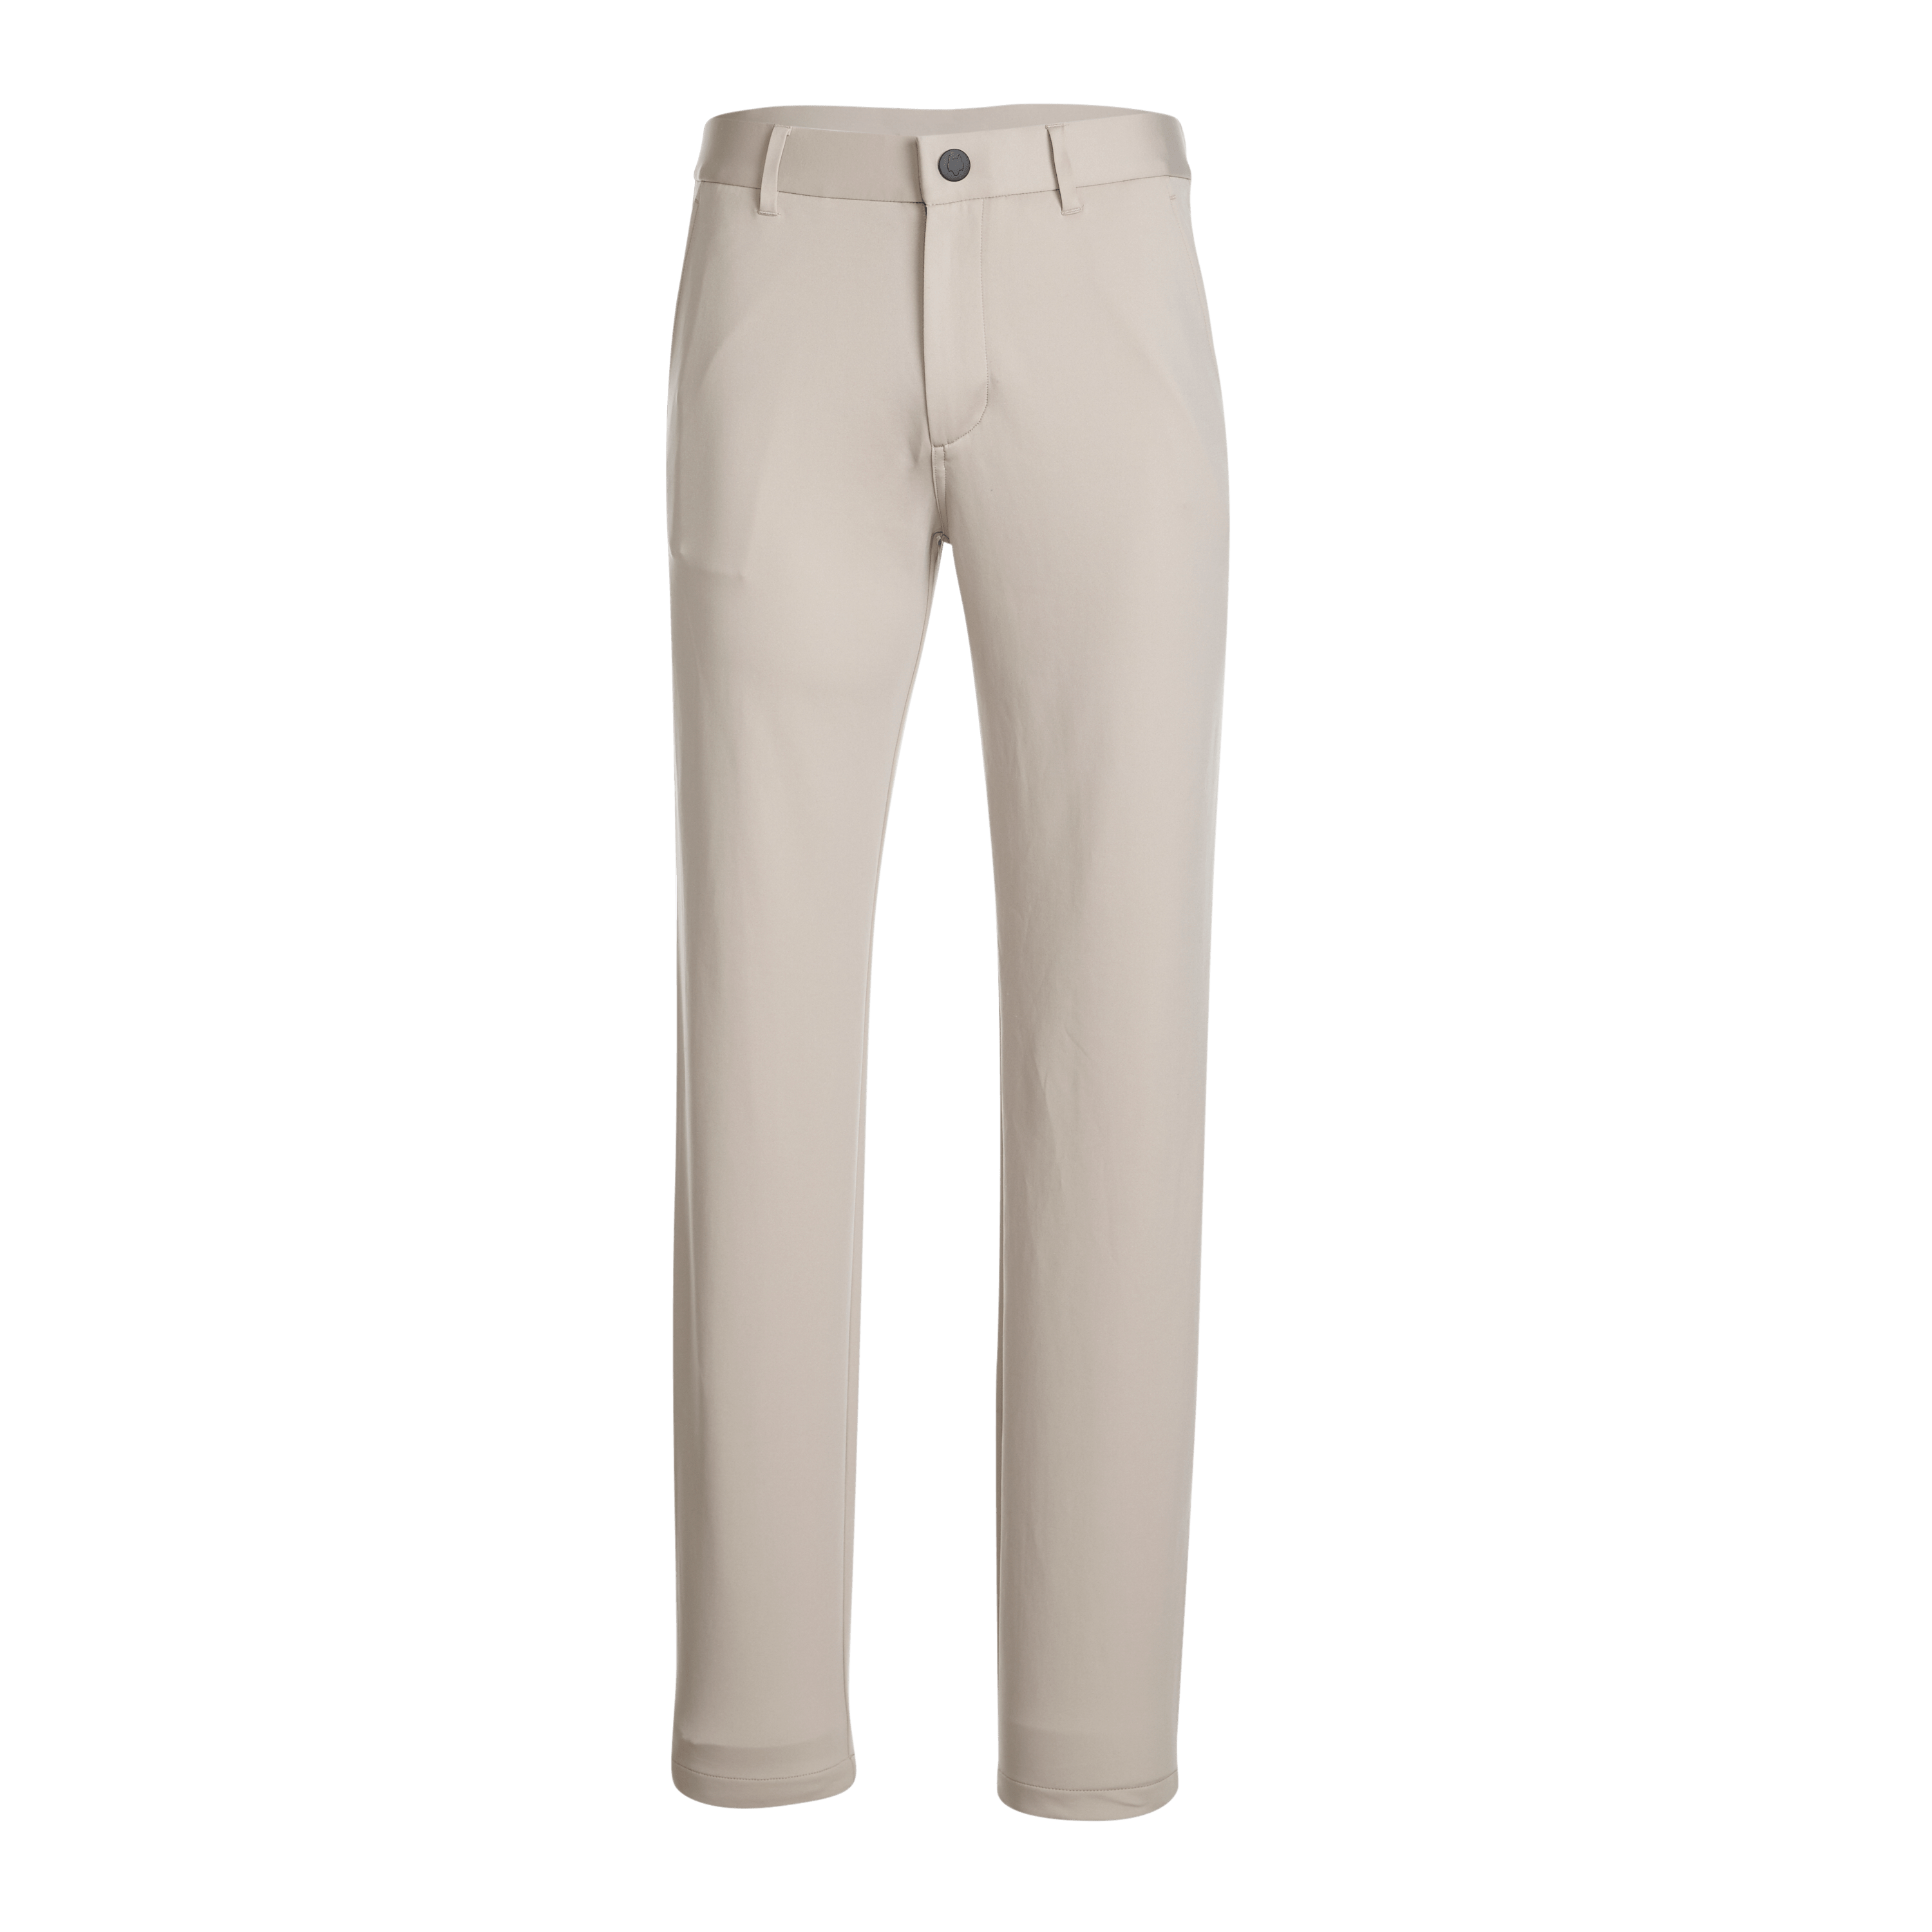 Golf Trousers Online in India | Sportdeals.in